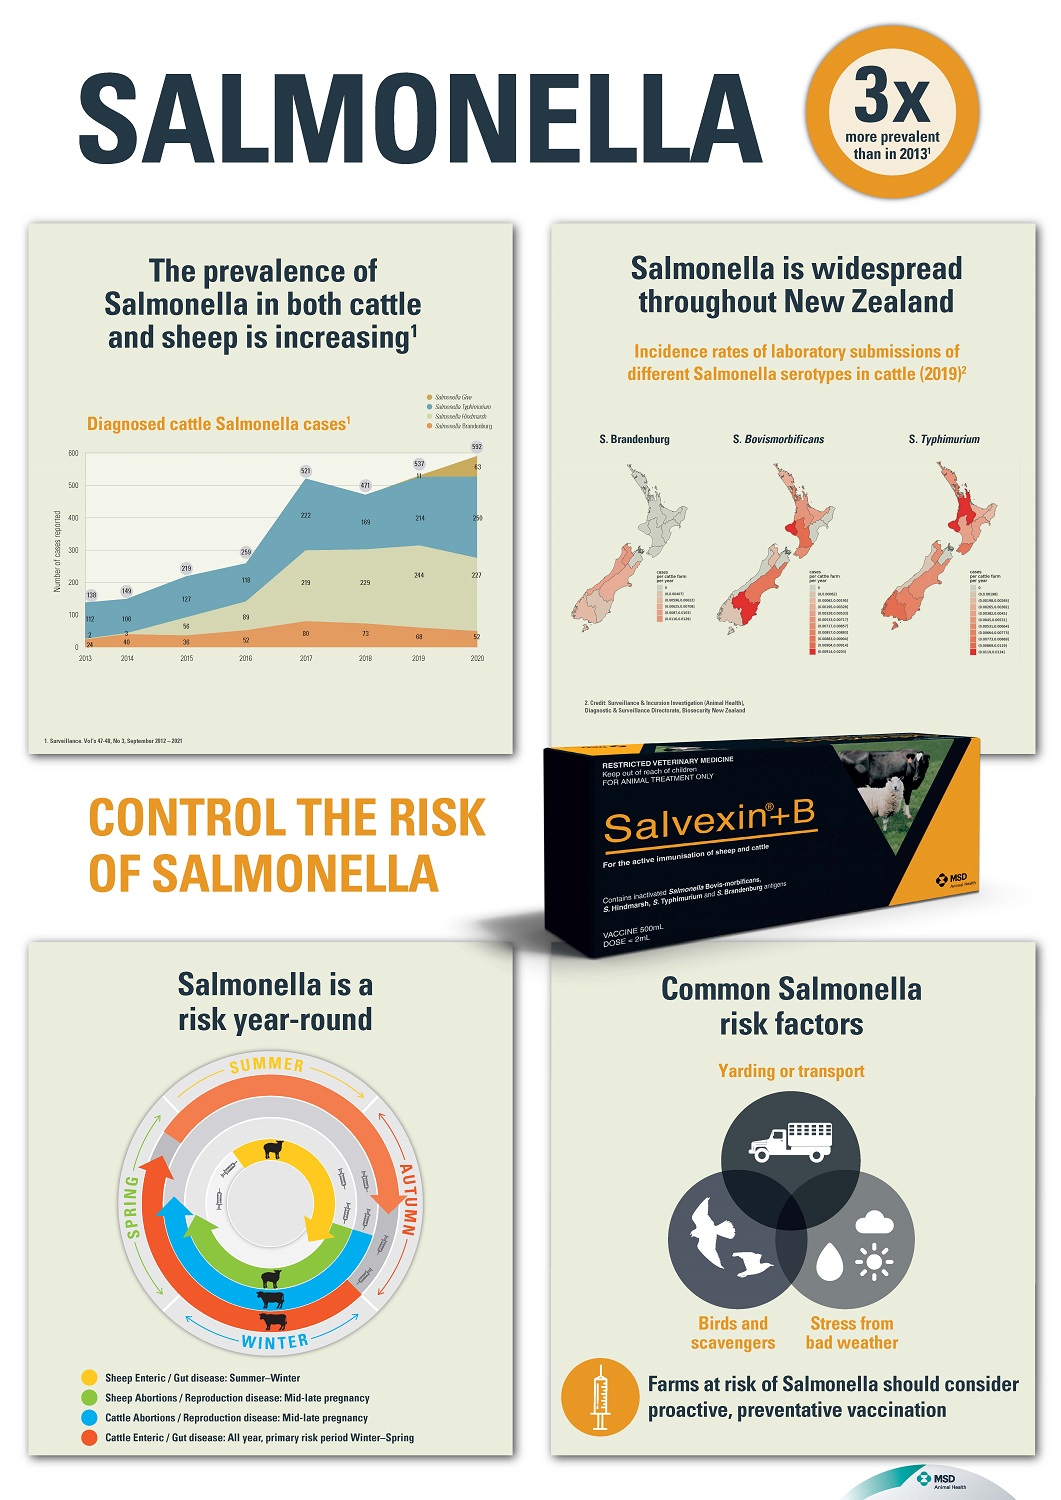 Key facts about Salmonella in New Zealand livestock including prevalence, distribution, risk period and risk factors